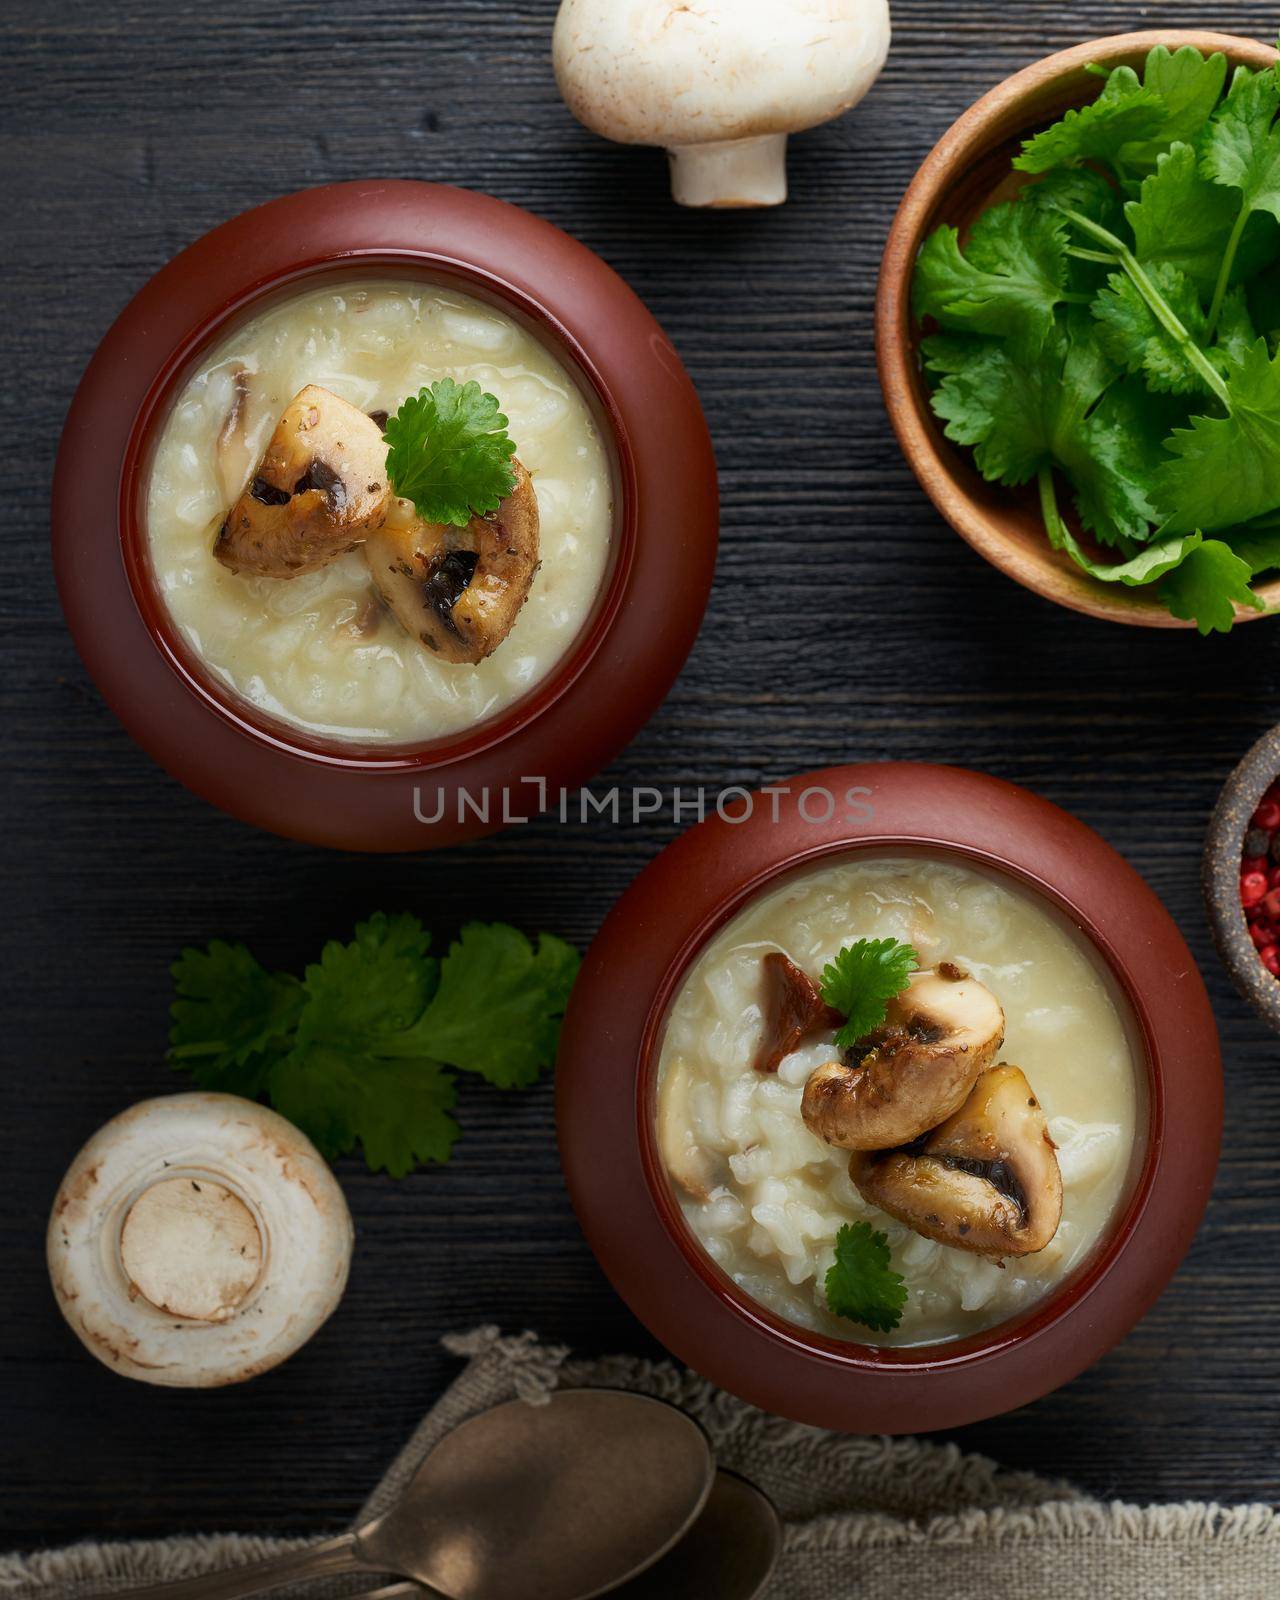 Unconventional unusual serving of risotto with mushrooms in pot. Rice porridge with mushrooms. by NataBene